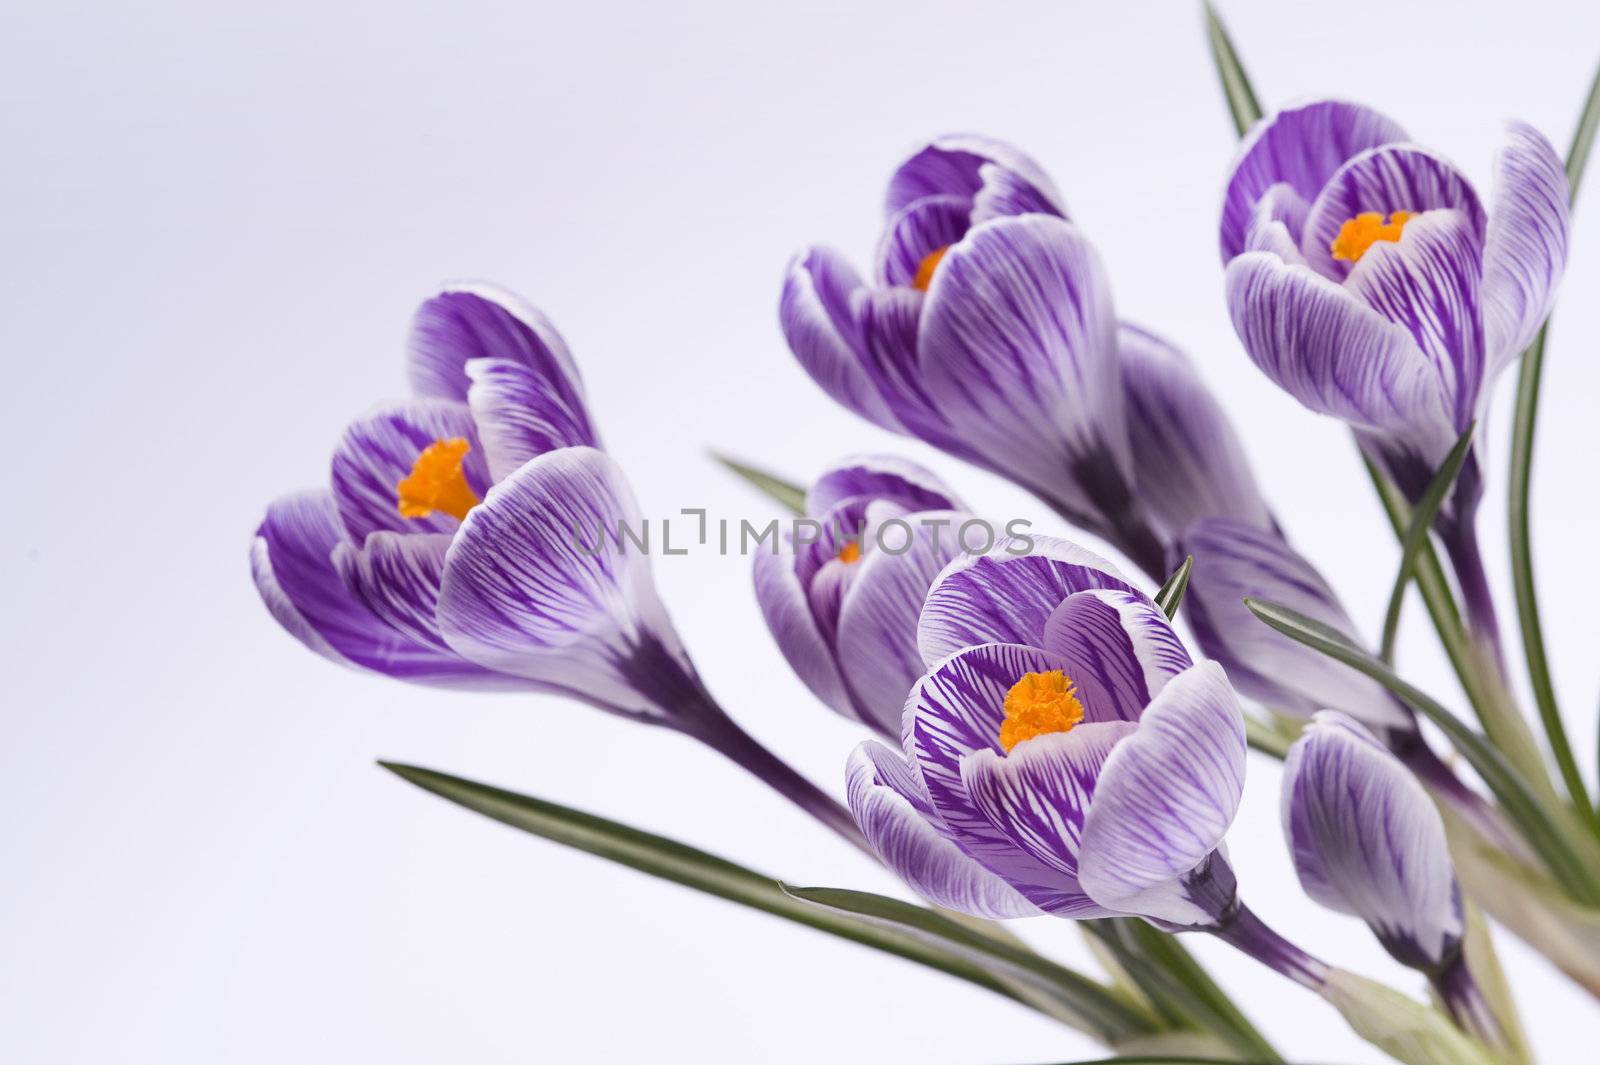 family of flowers, striped crocus on white background